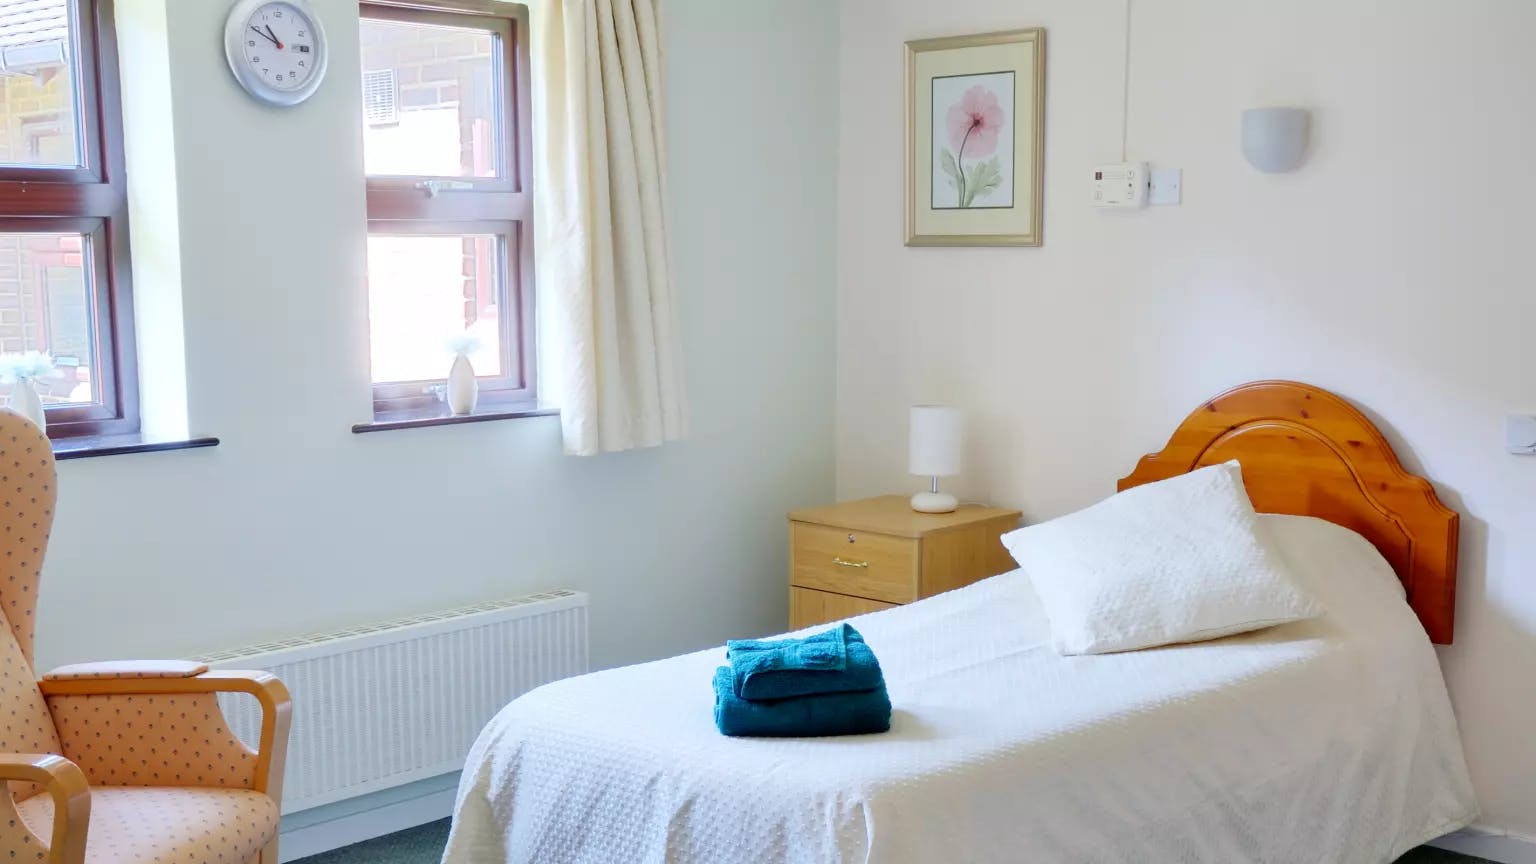 Bedroom of Beane River View care home in Hertford, Hertfordshire